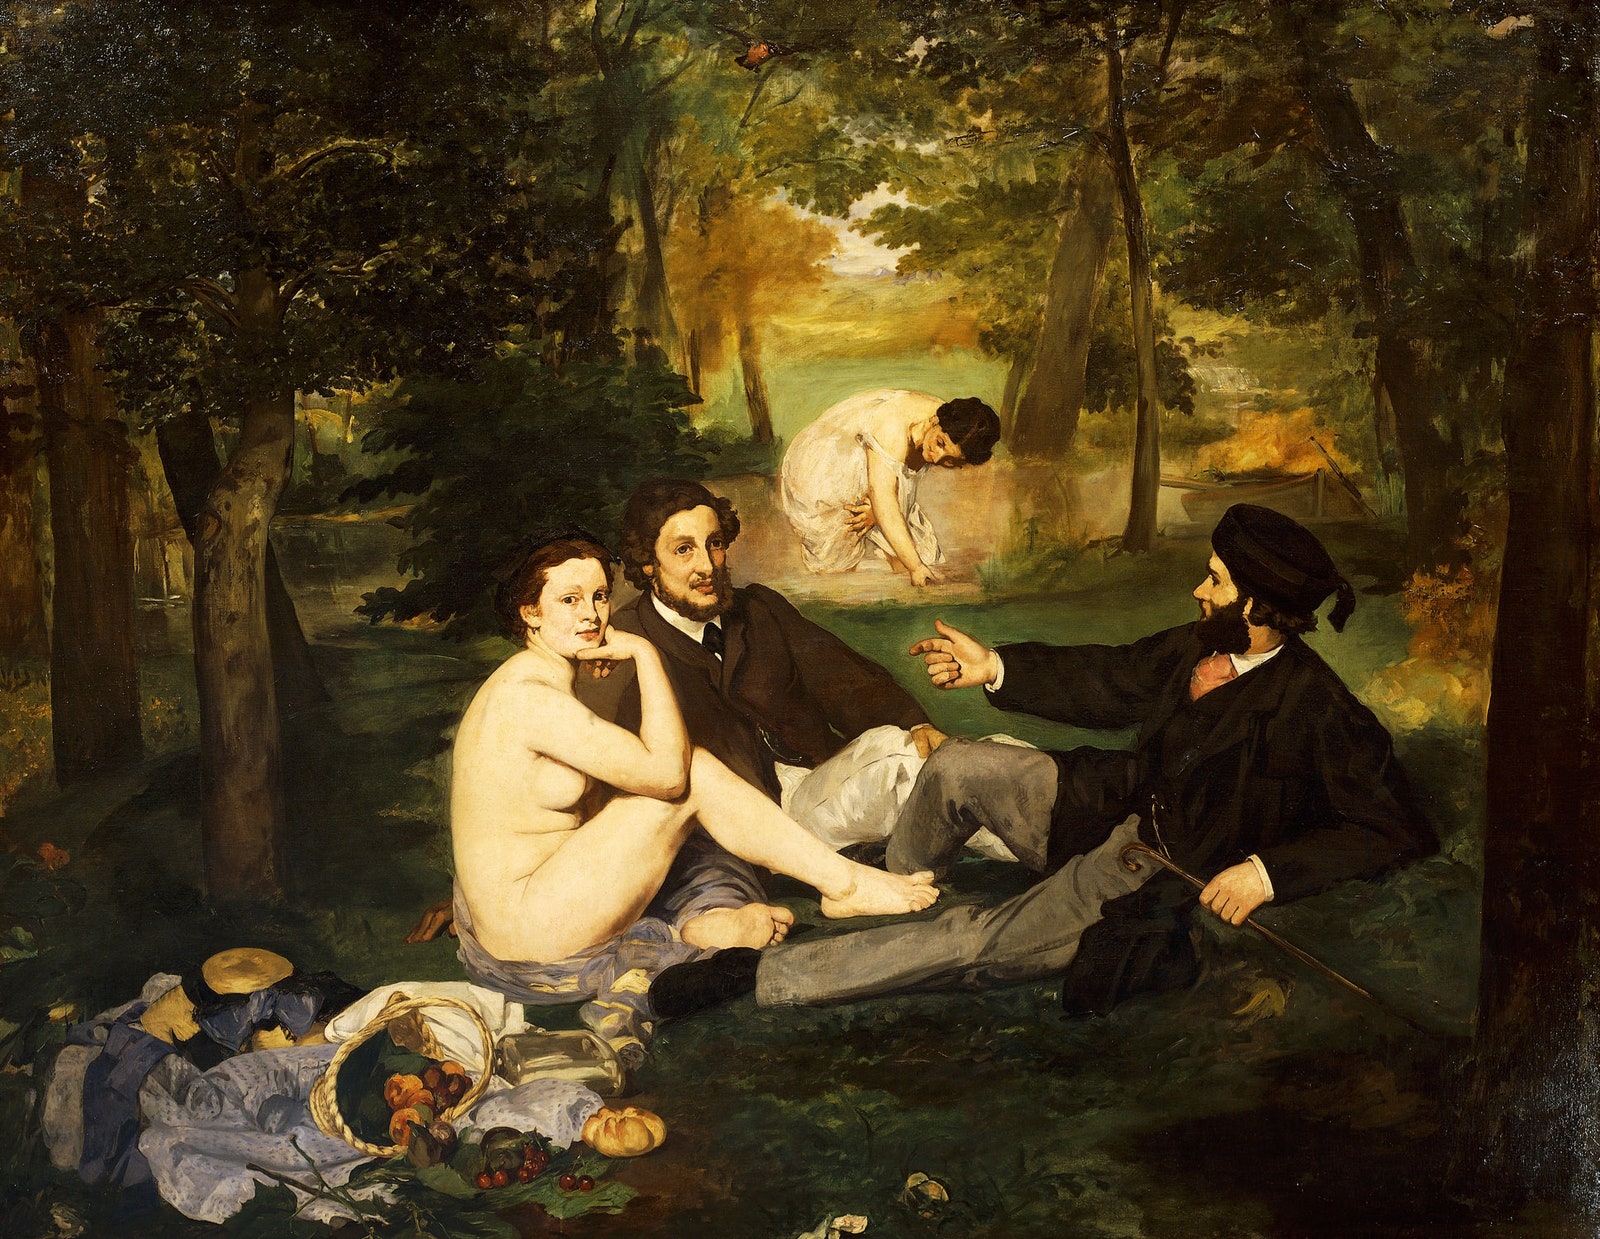 Breakfast on the grass 1863 by Edouard Manet